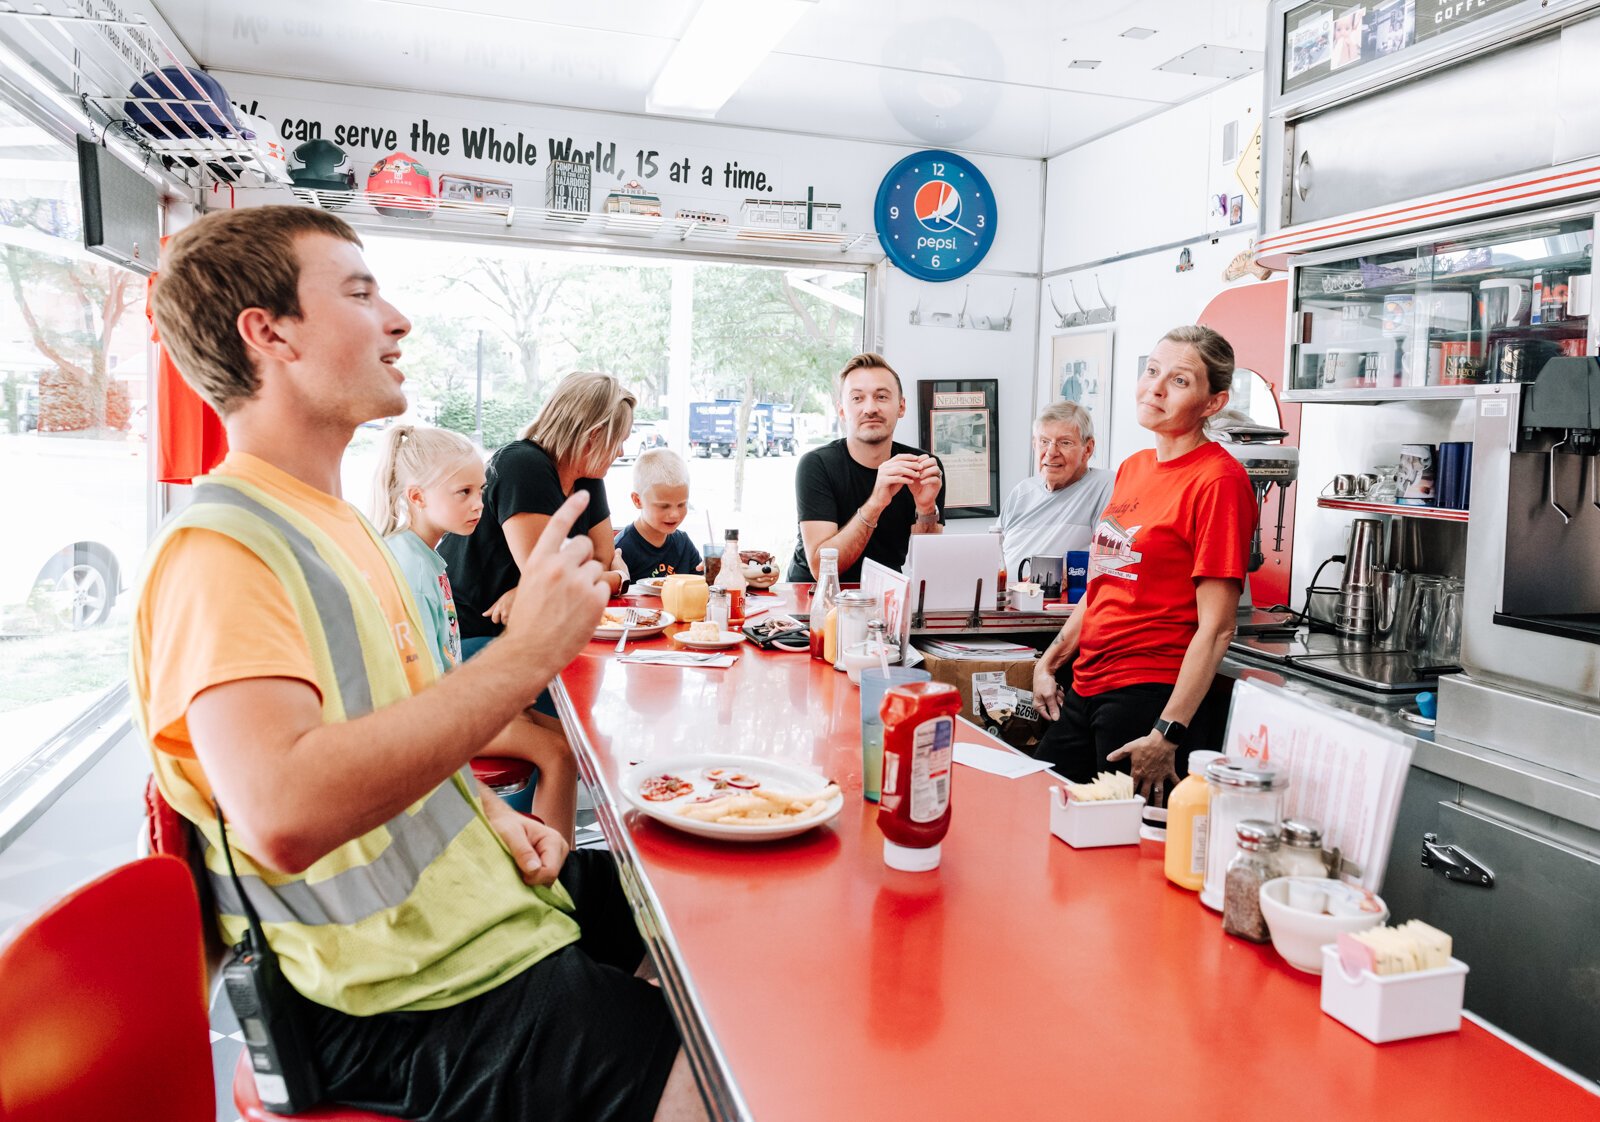 Guests enjoy the atmosphere and food at Cindy's Diner, 230 W. Berry St.